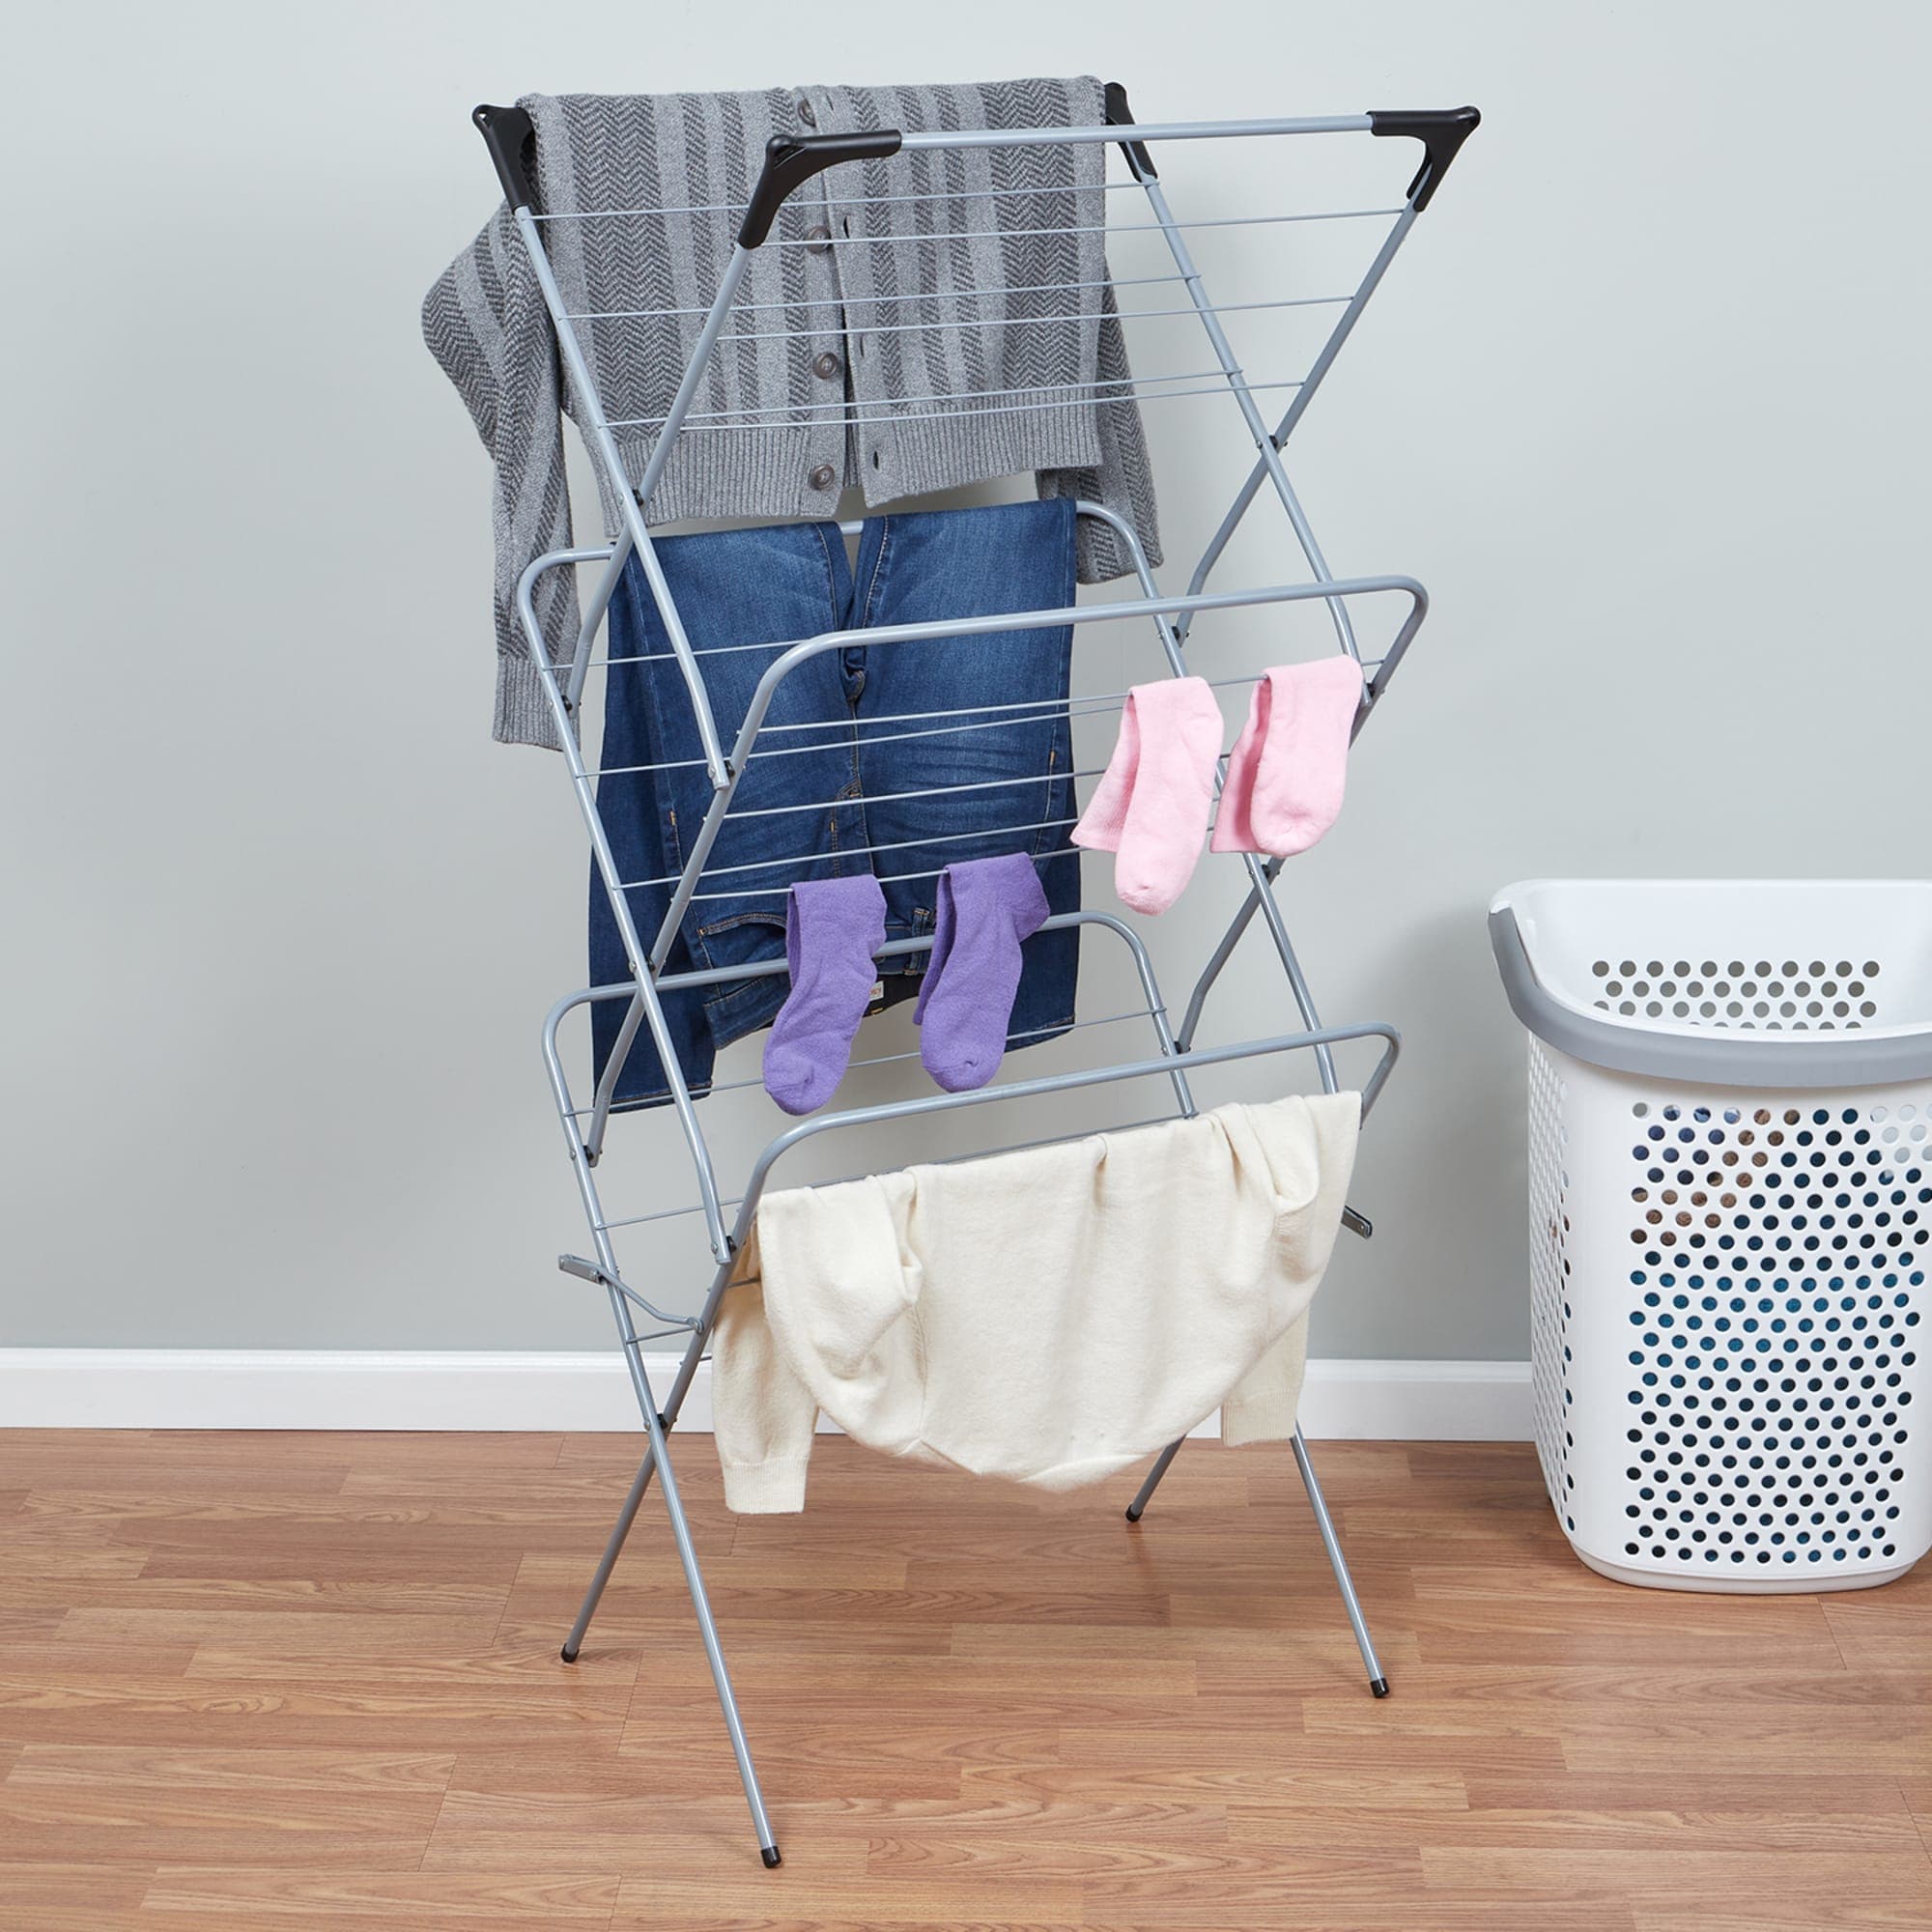 Home Basics 3-Tier Clothes Dryer $15.00 EACH, CASE PACK OF 4